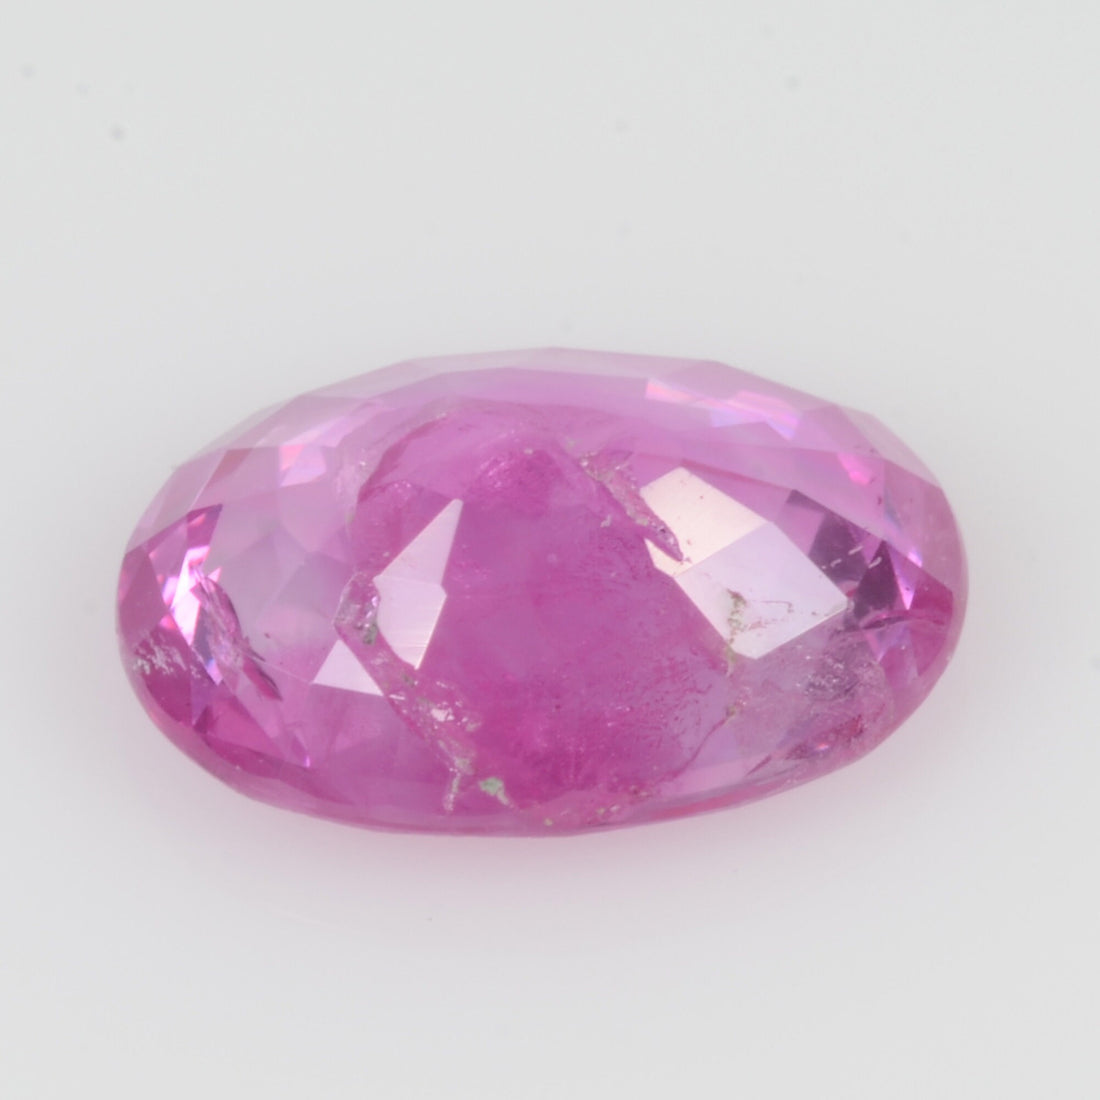 1.31 cts Natural Pink Sapphire Loose Gemstone oval Cut